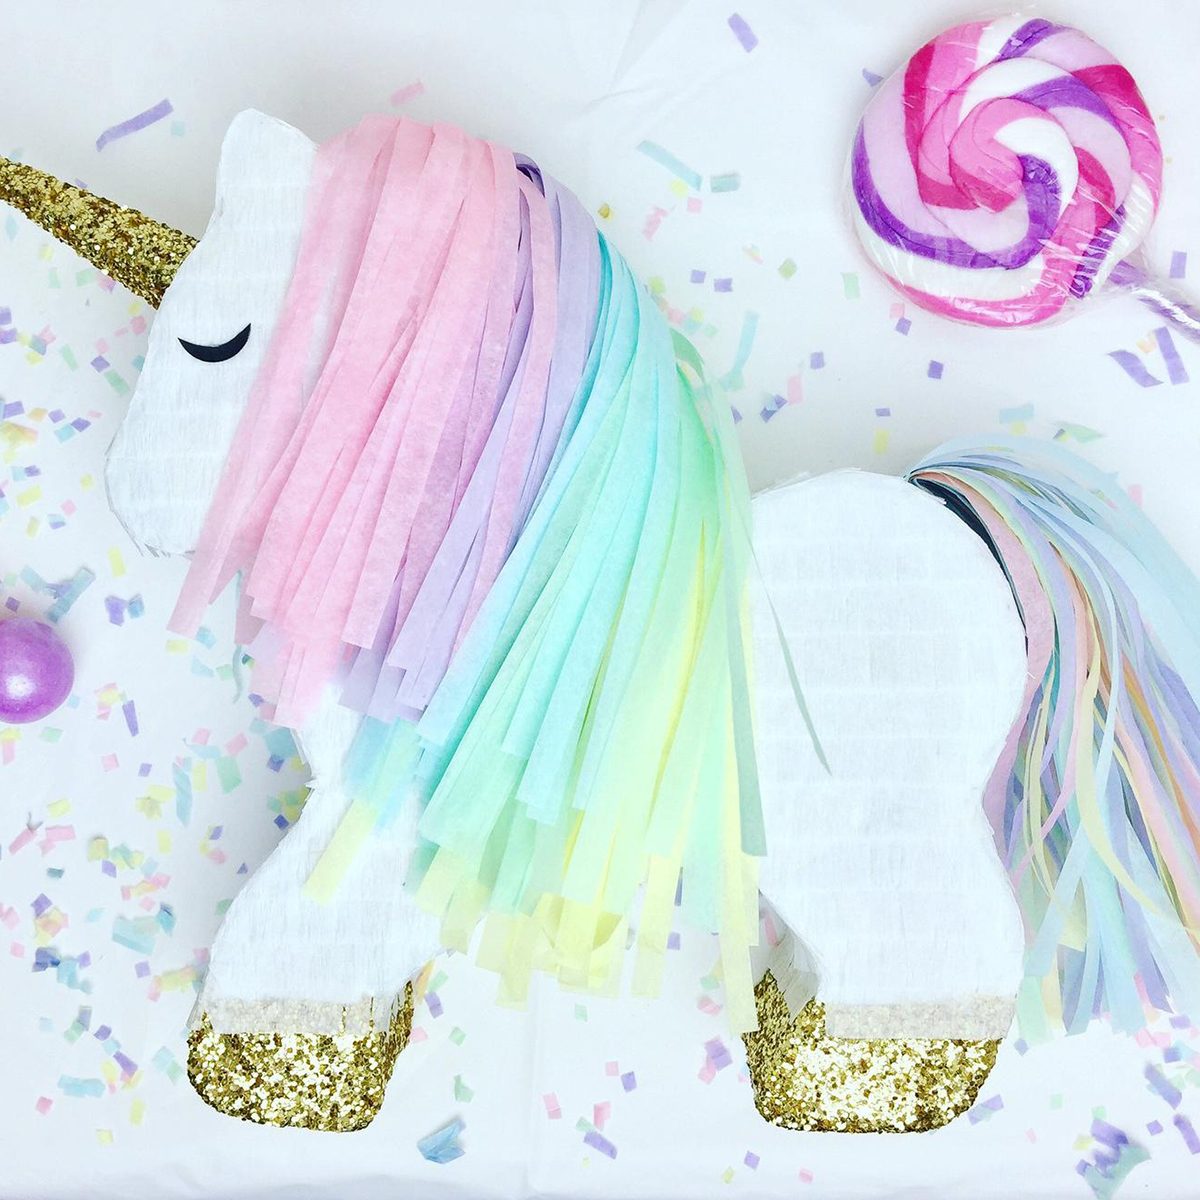 Unicorn Birthday Party Ideas: How to Host a Magical Party